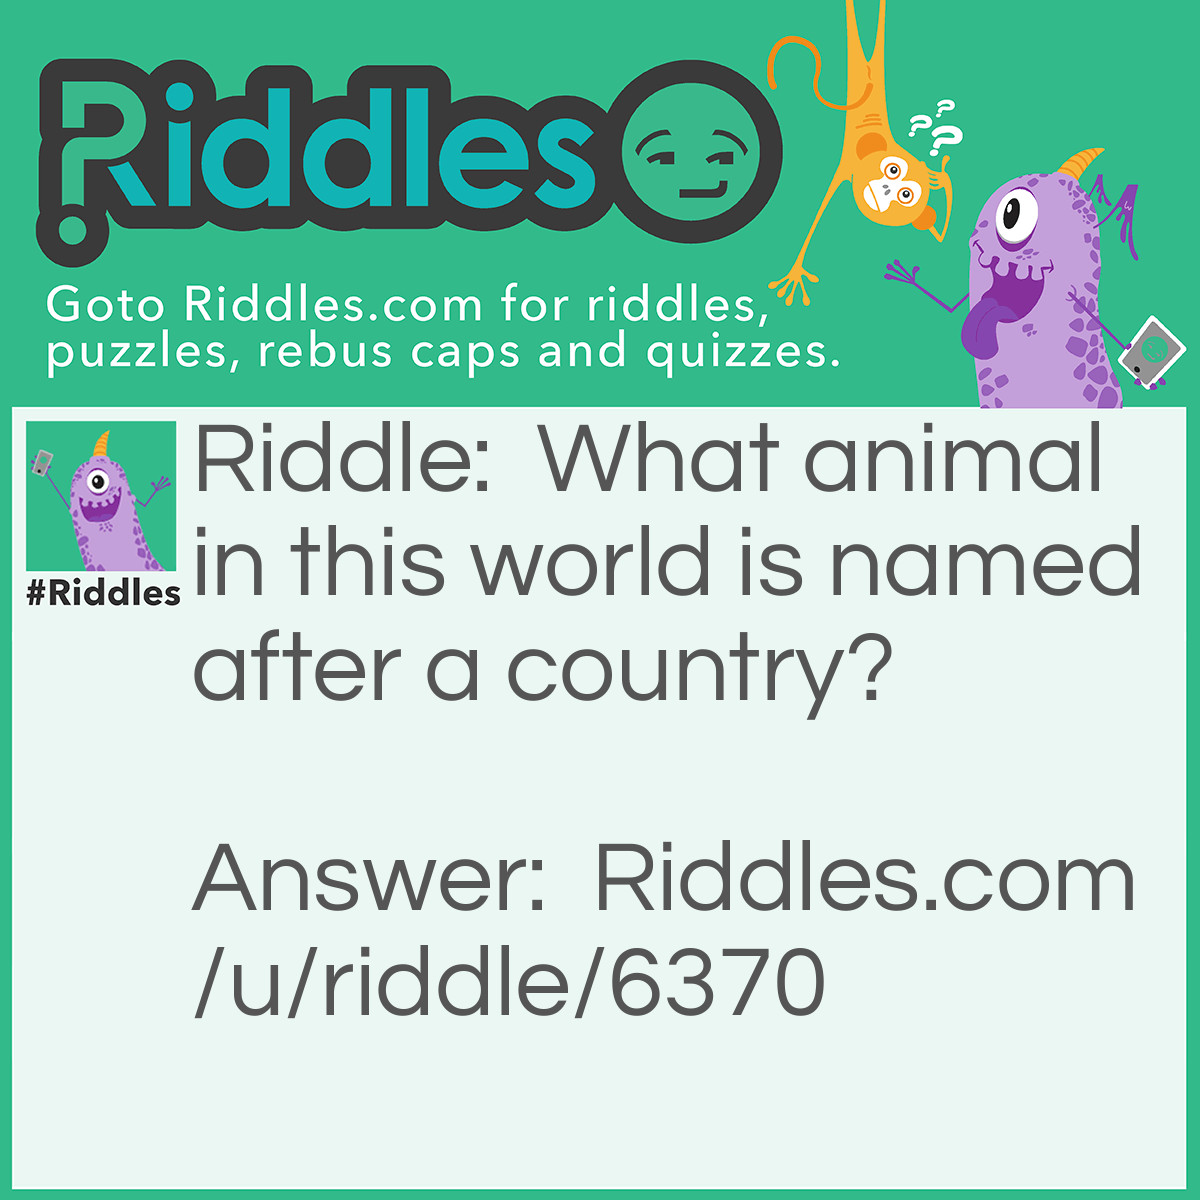 Riddle: What animal in this world is named after a country? Answer: Turkey.